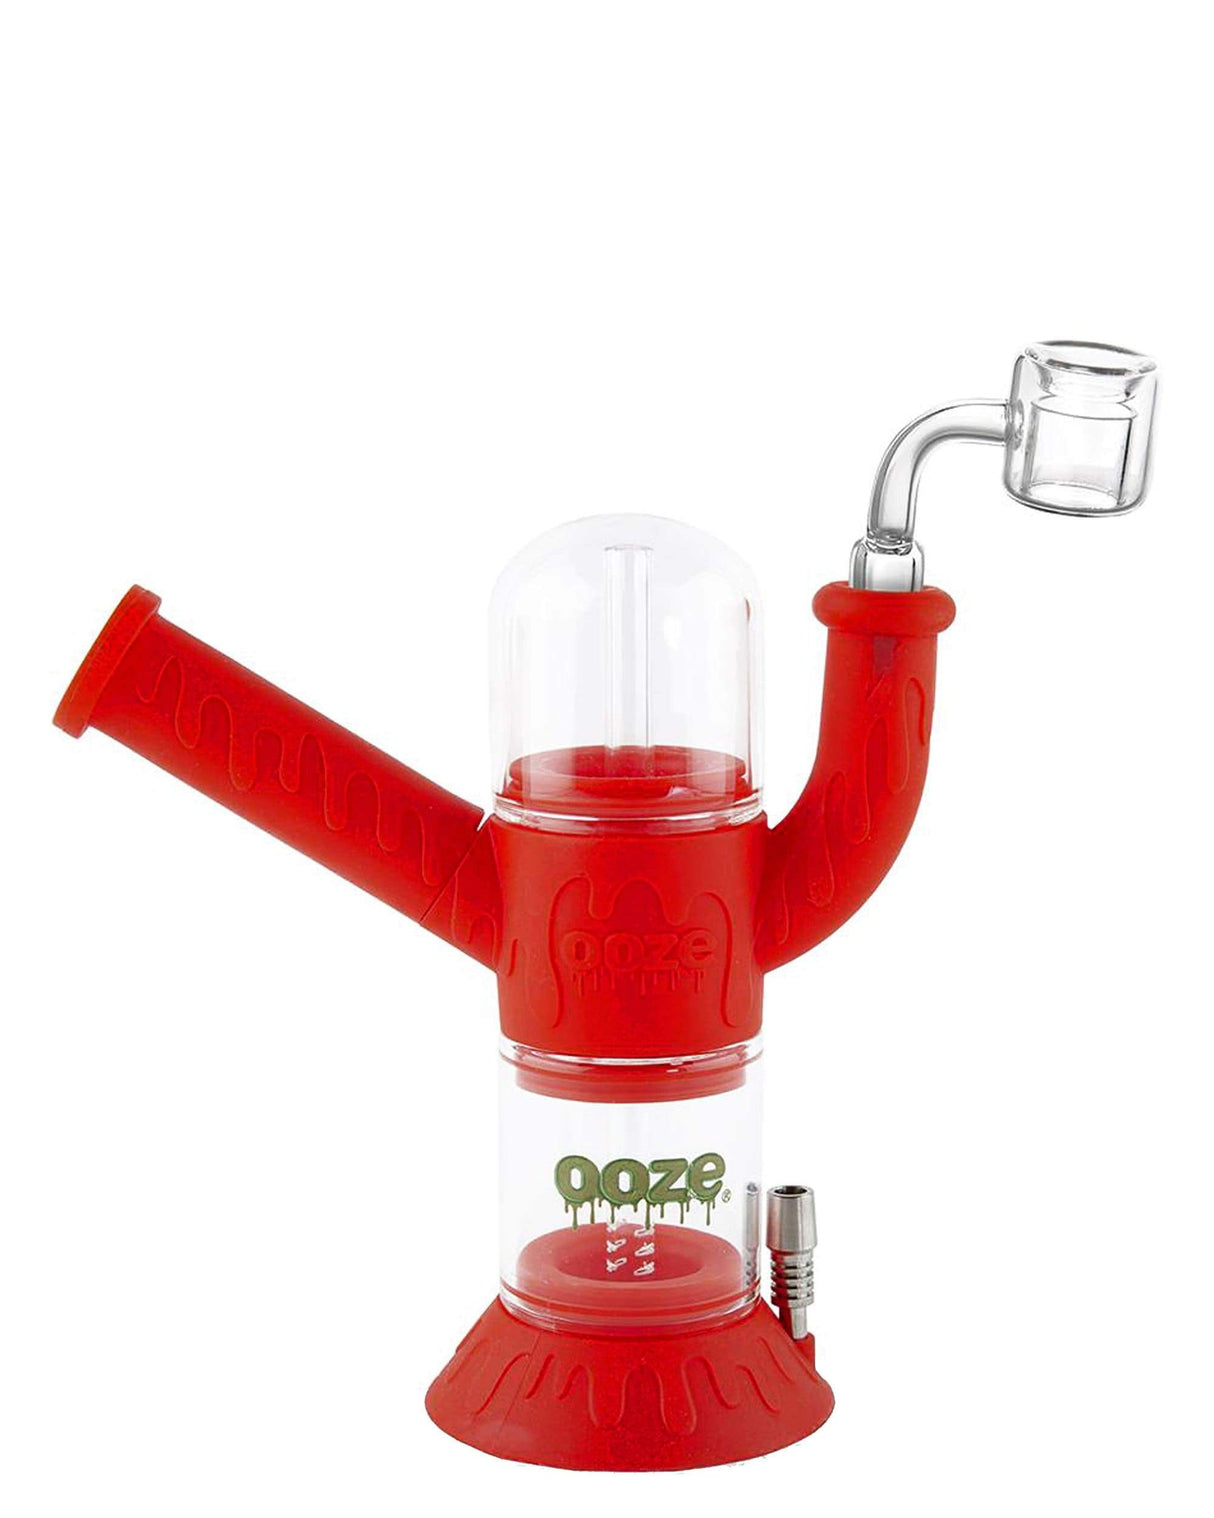 Ooze Cranium Bong & Dab Rig in red, front view, with quartz banger and silicone body for durability